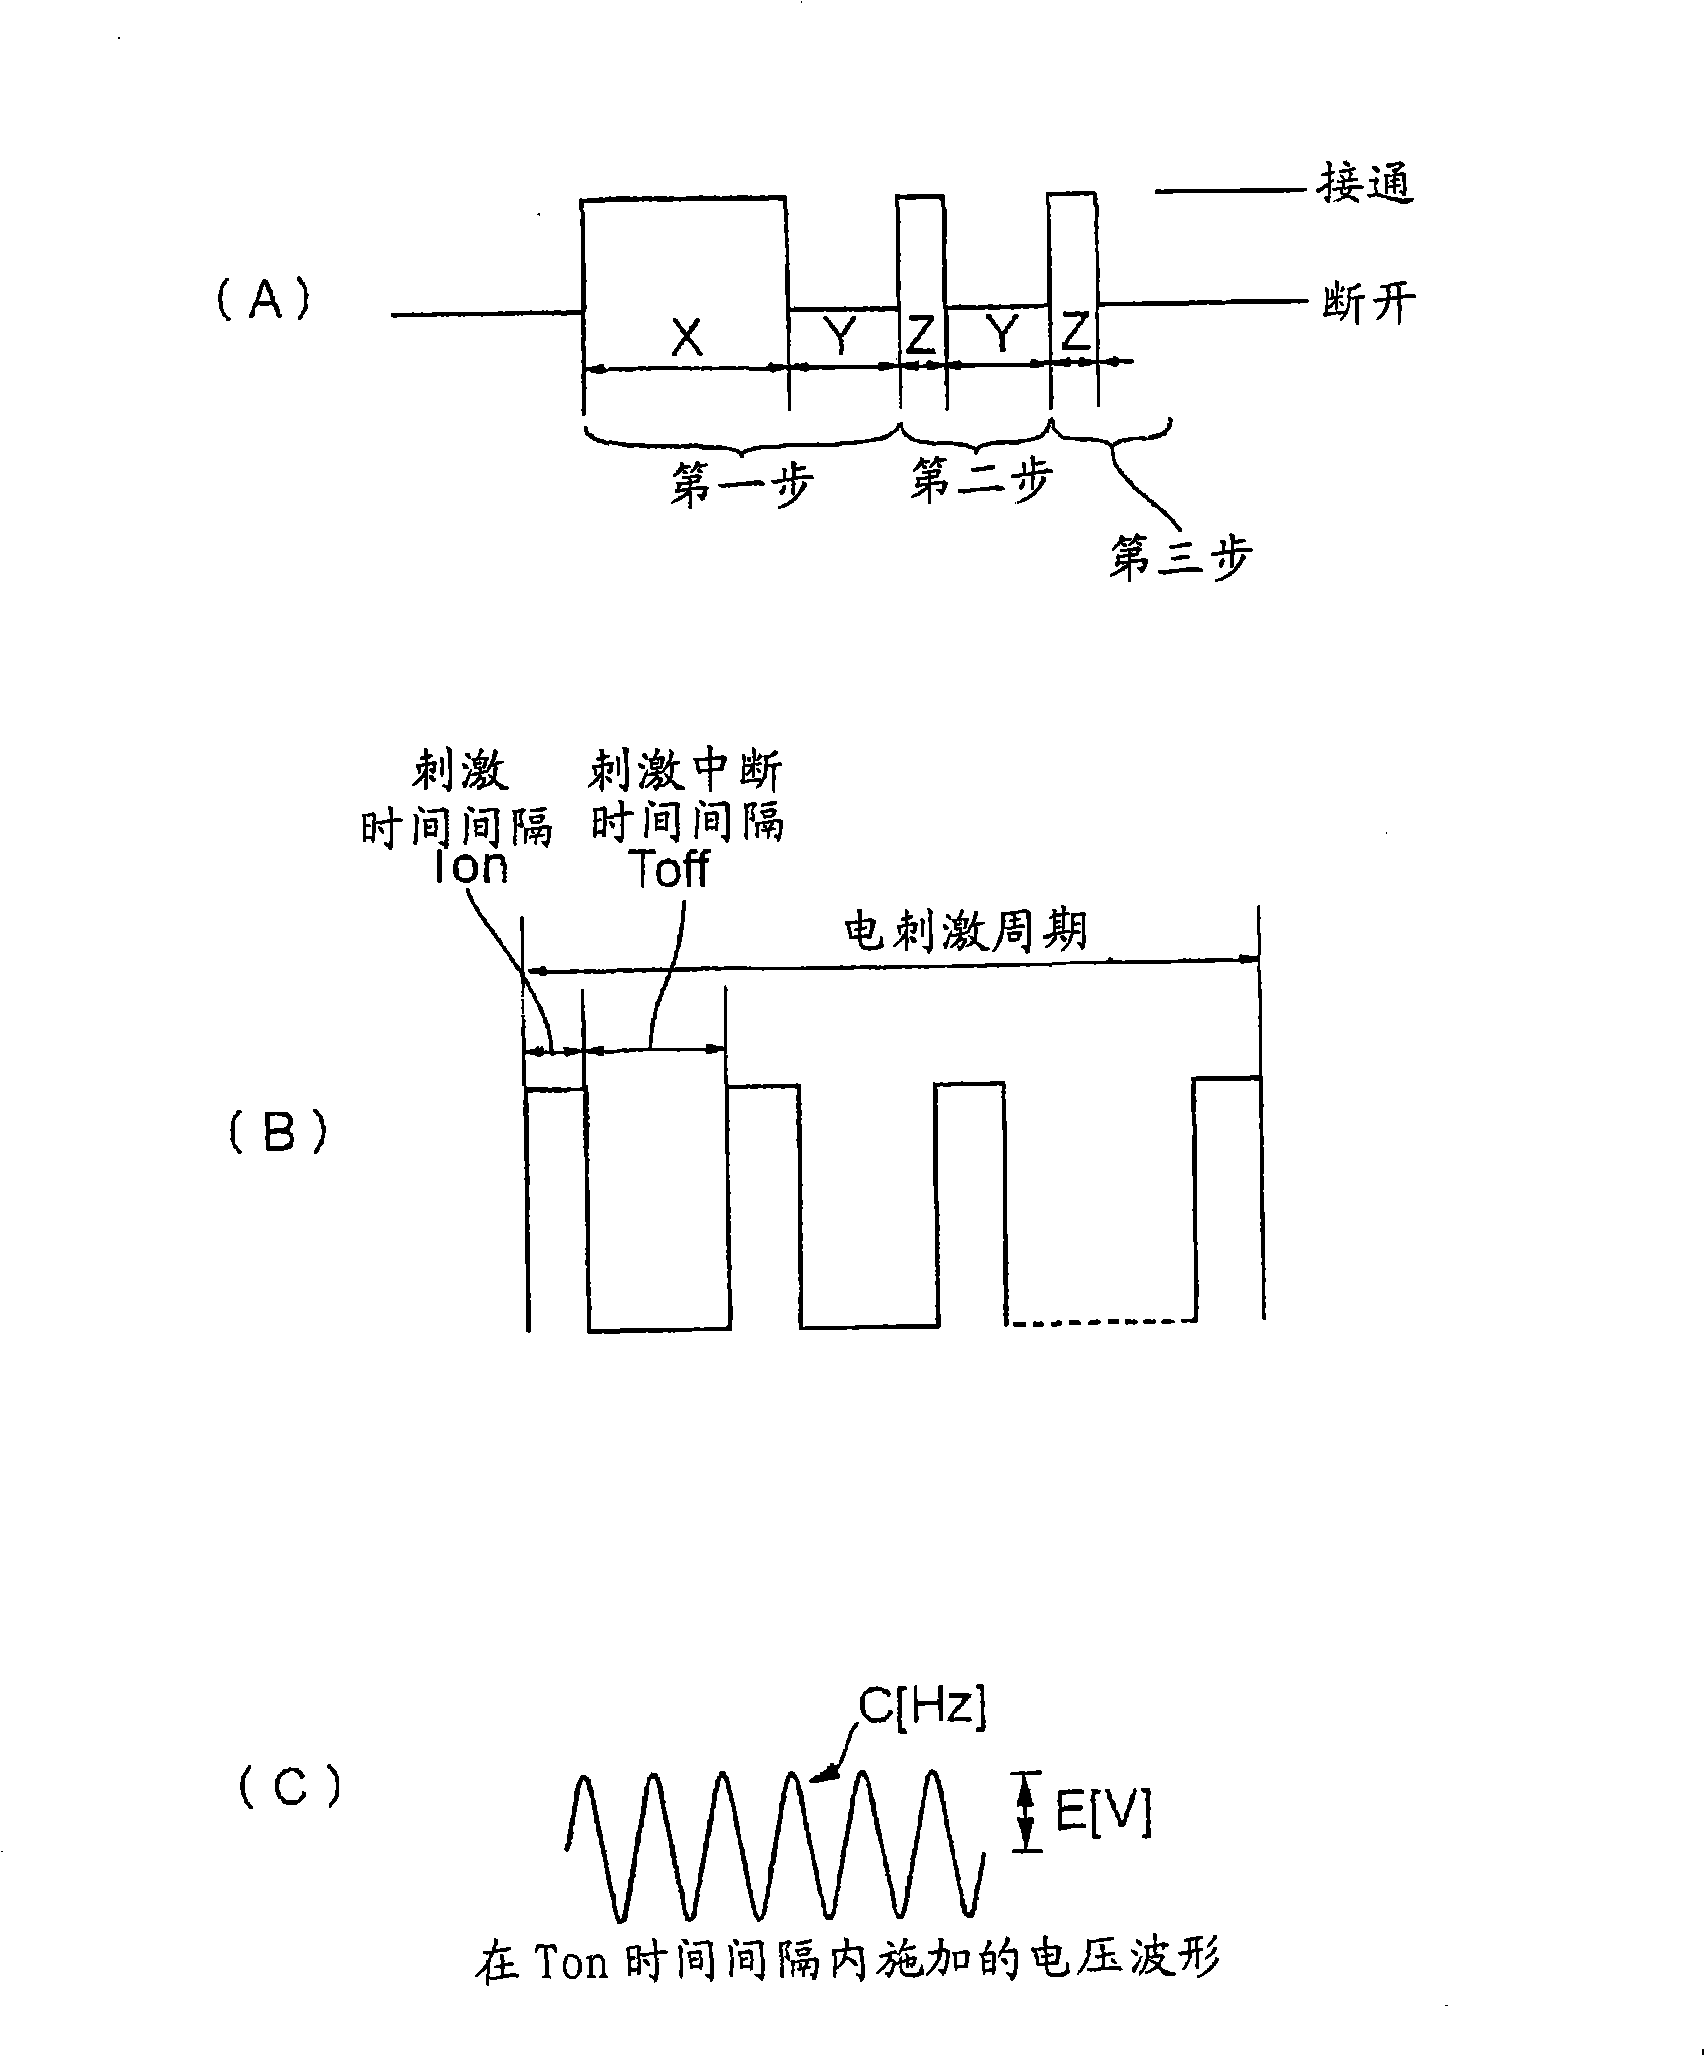 Device and method for processing meat carcass